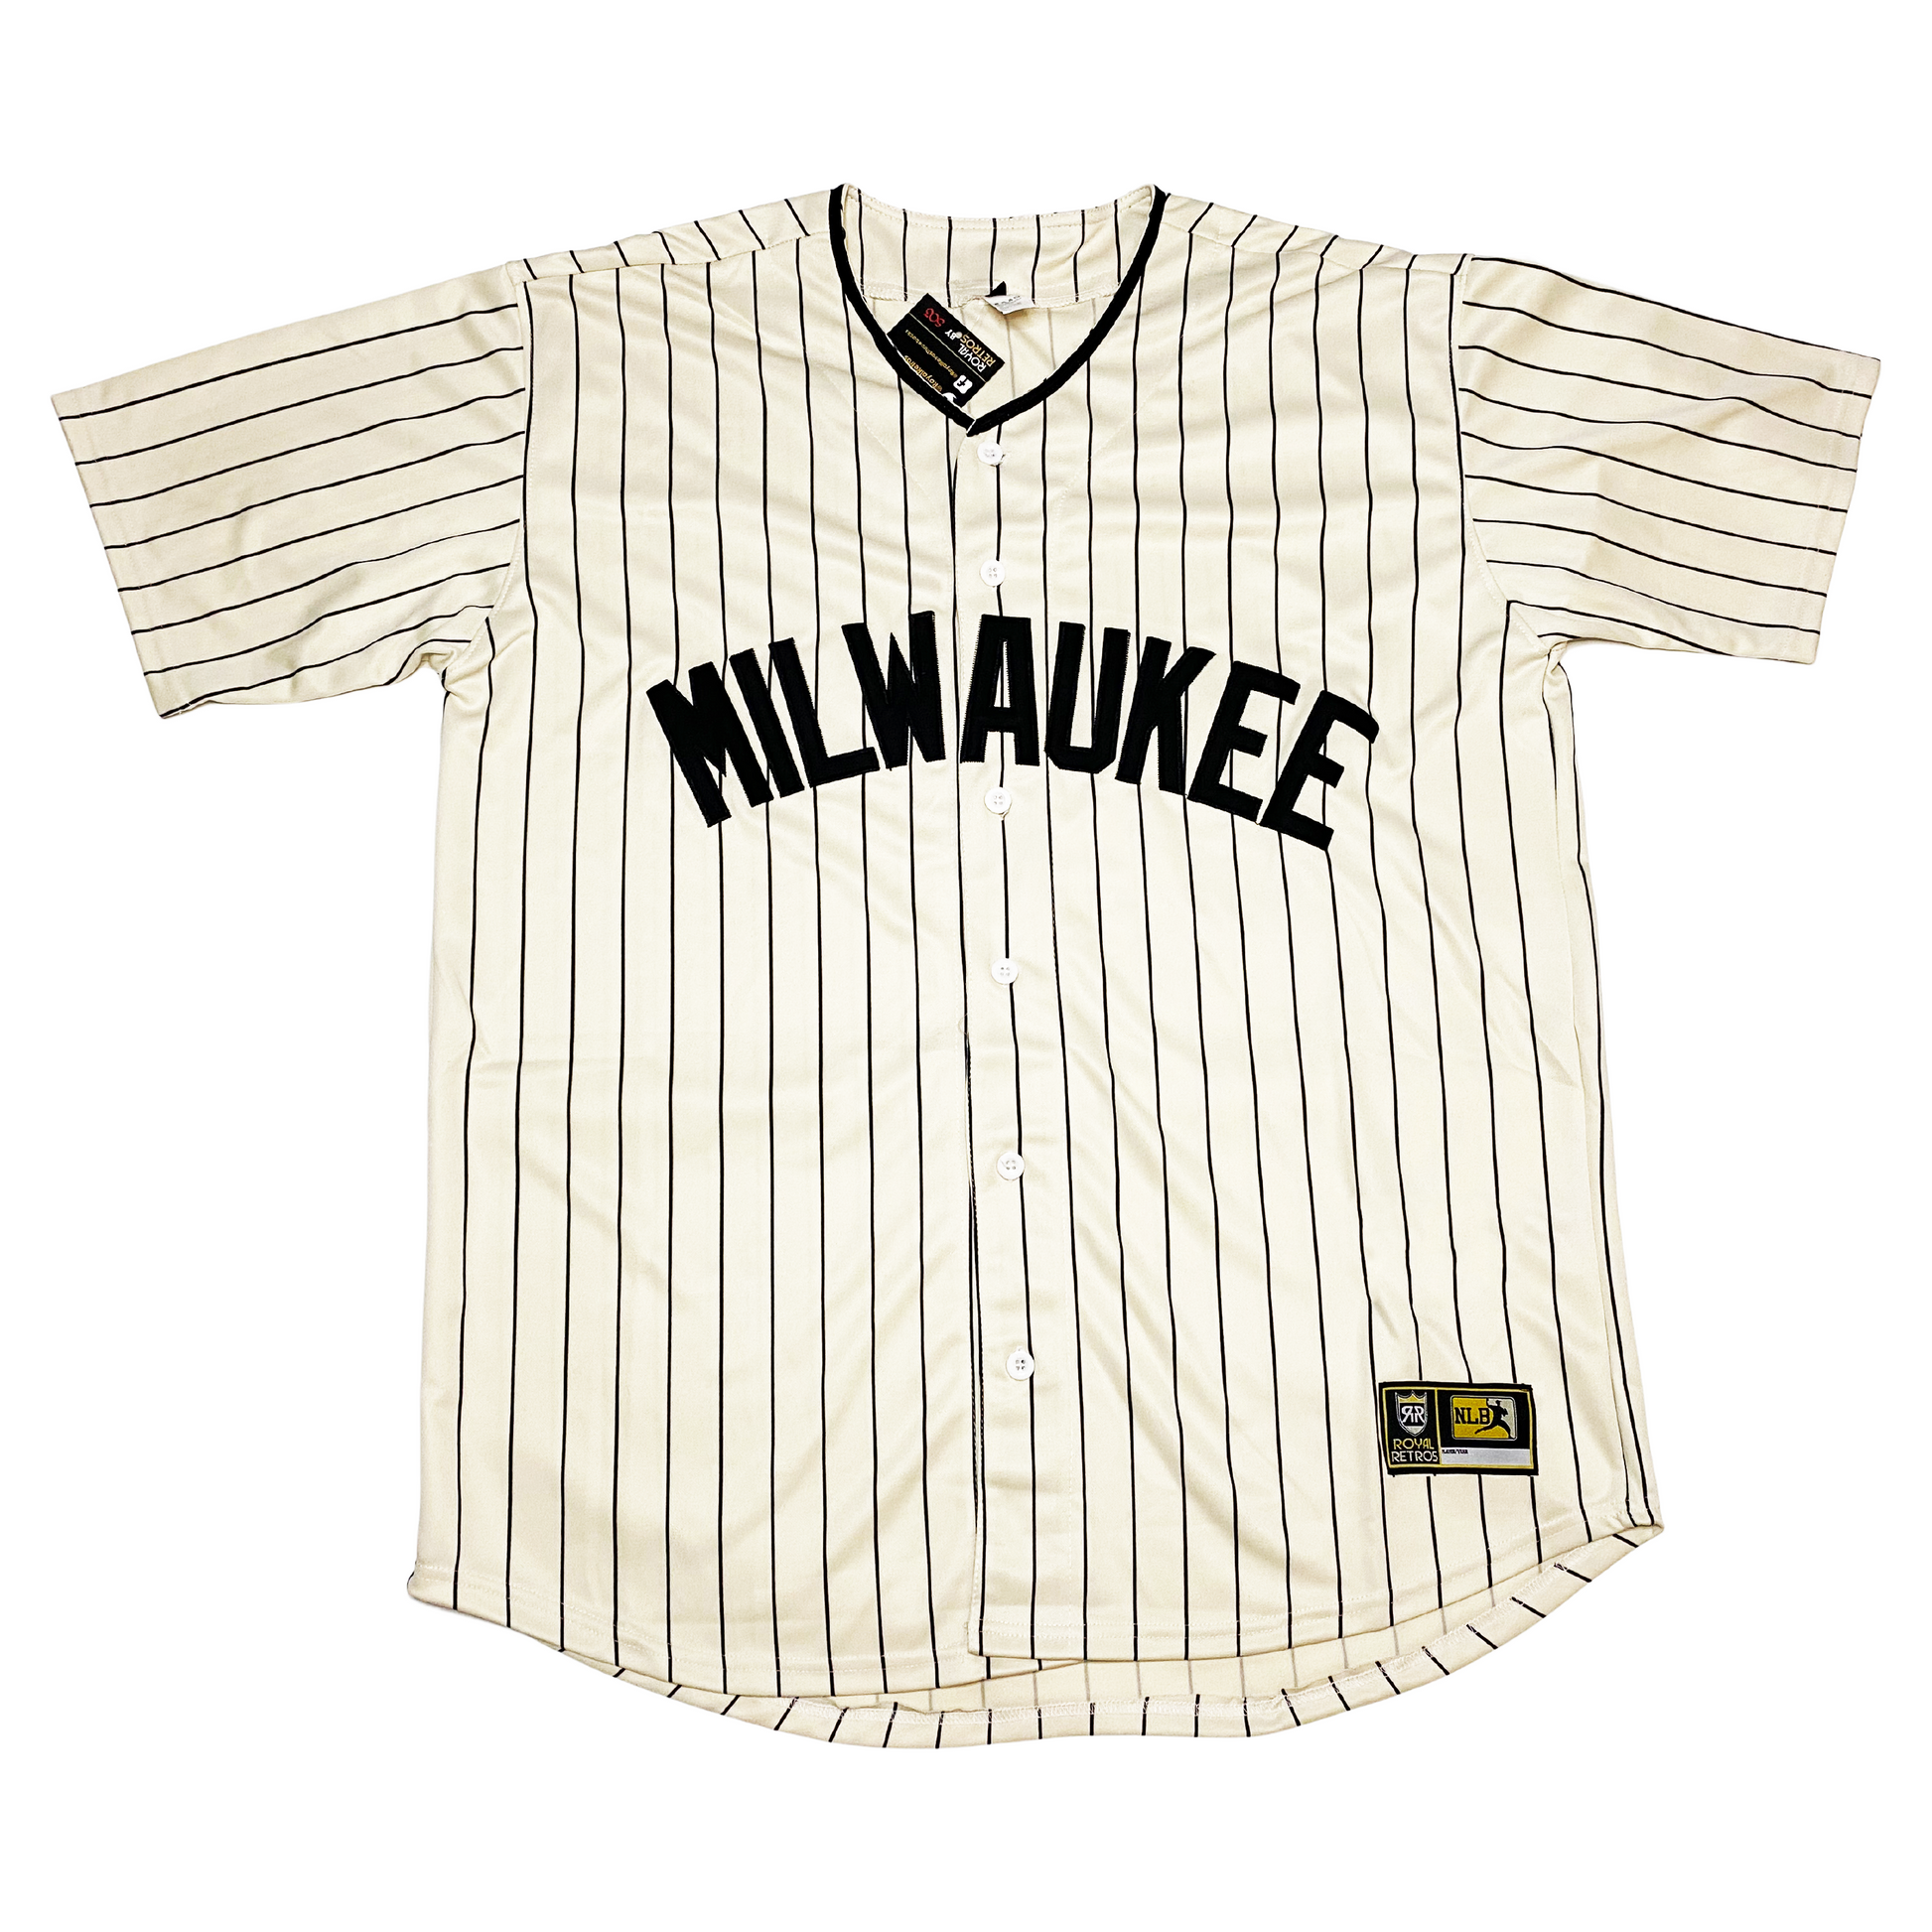 Bears baseball: A look back at the Negro Leagues in Milwaukee